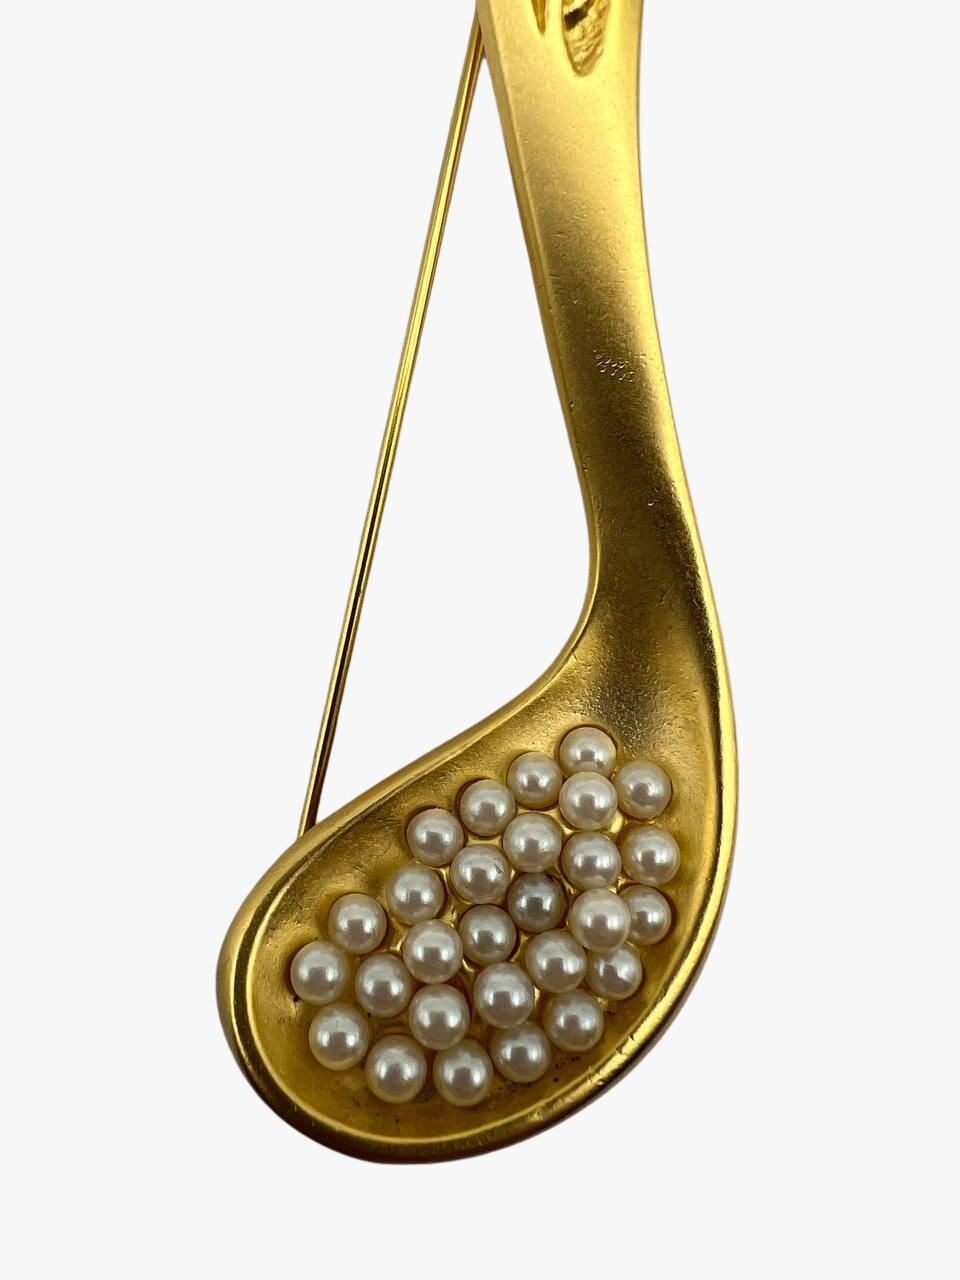 Vintage brooch by Karl Lagerfeld features spoon full of caviar made of faux pearls 24k gold plate. 

Signed. KL monograms. 

Year: 1992s

Condition: excellent. No visible signs of wear. 

Size: 12 cm

........Additional information ........

- Photo